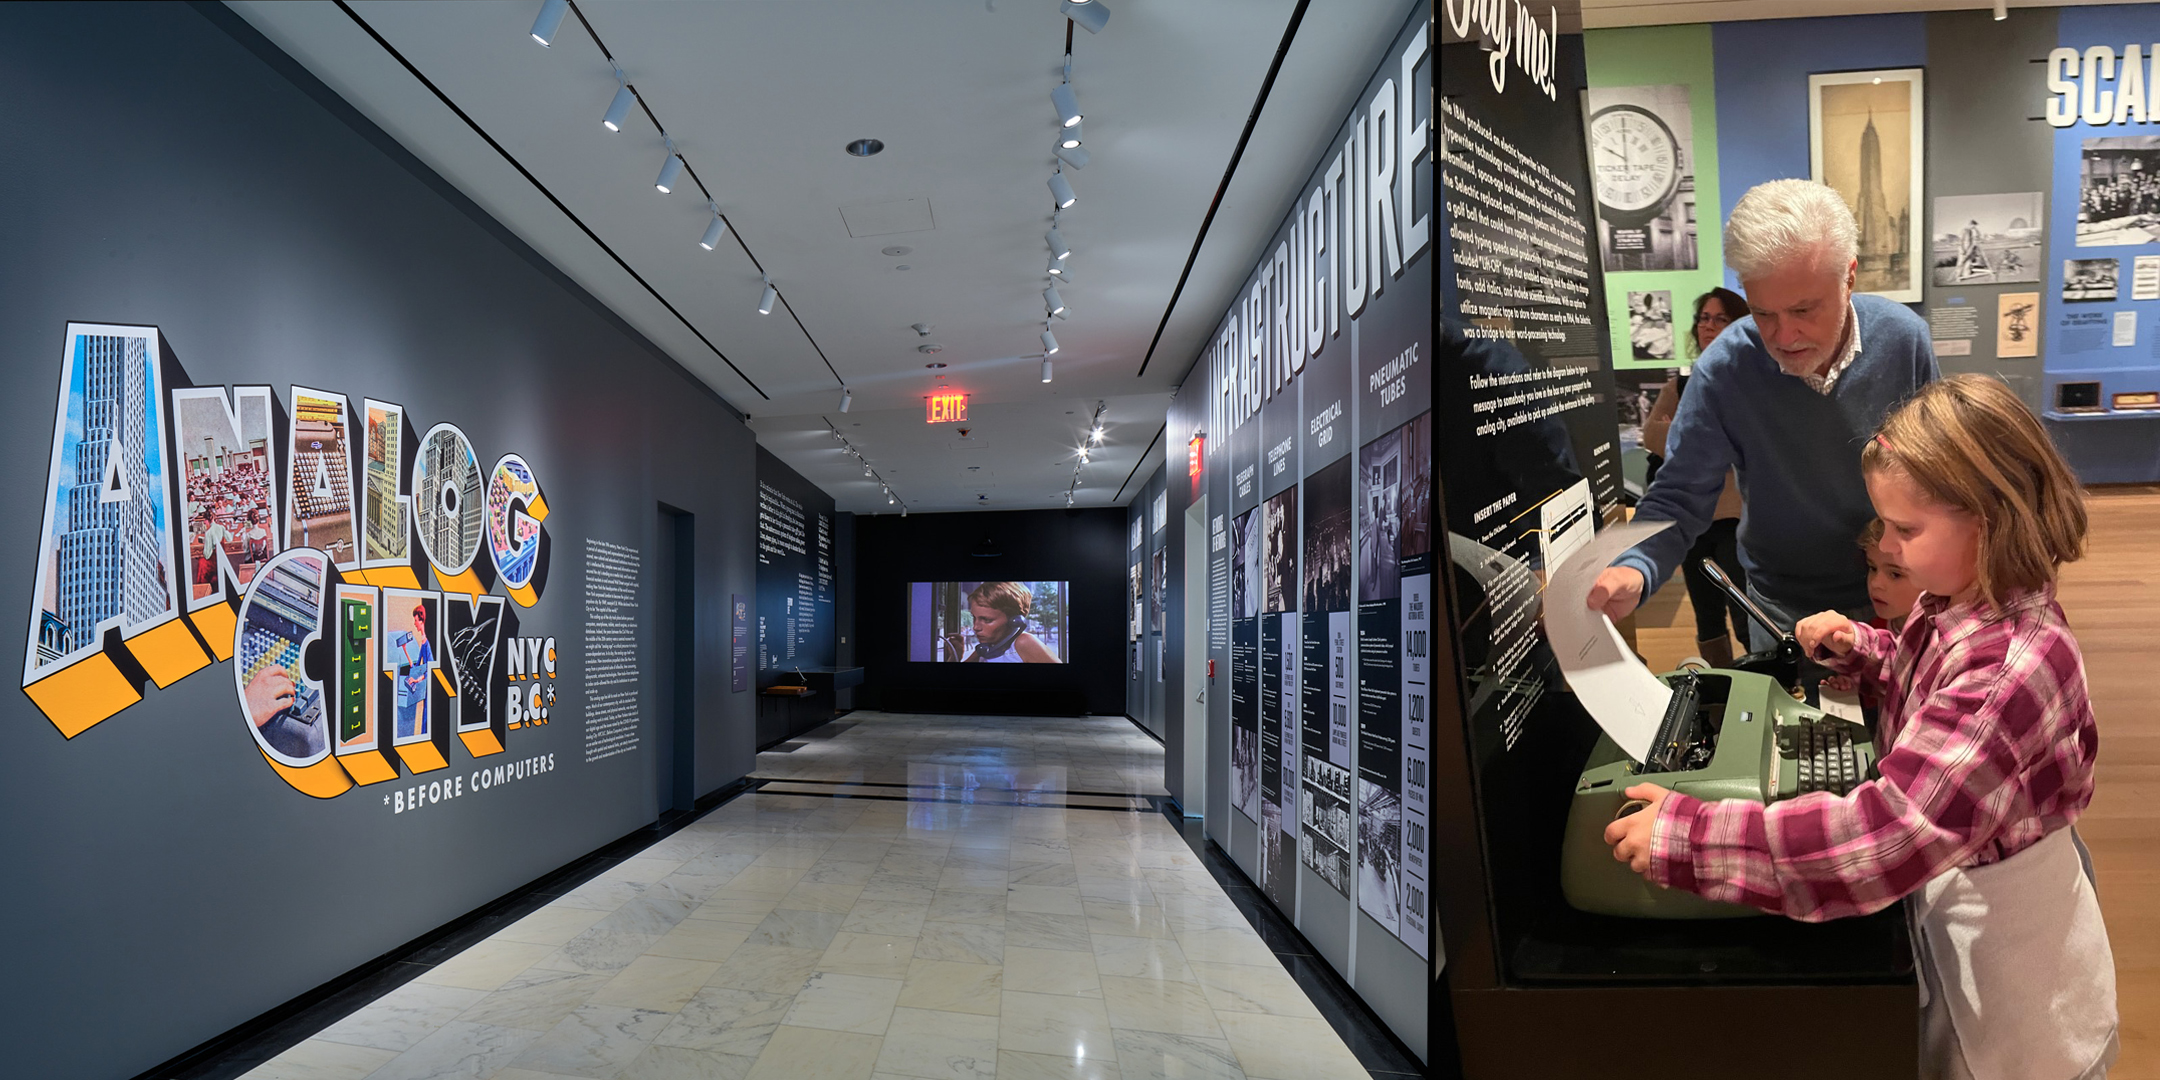 Composite image. On the left, an installation view of the hallway entering the exhibition Analog City, with the title treatment on the wall. On the right is an older gentleman helping a young girl feed paper into a typewriter